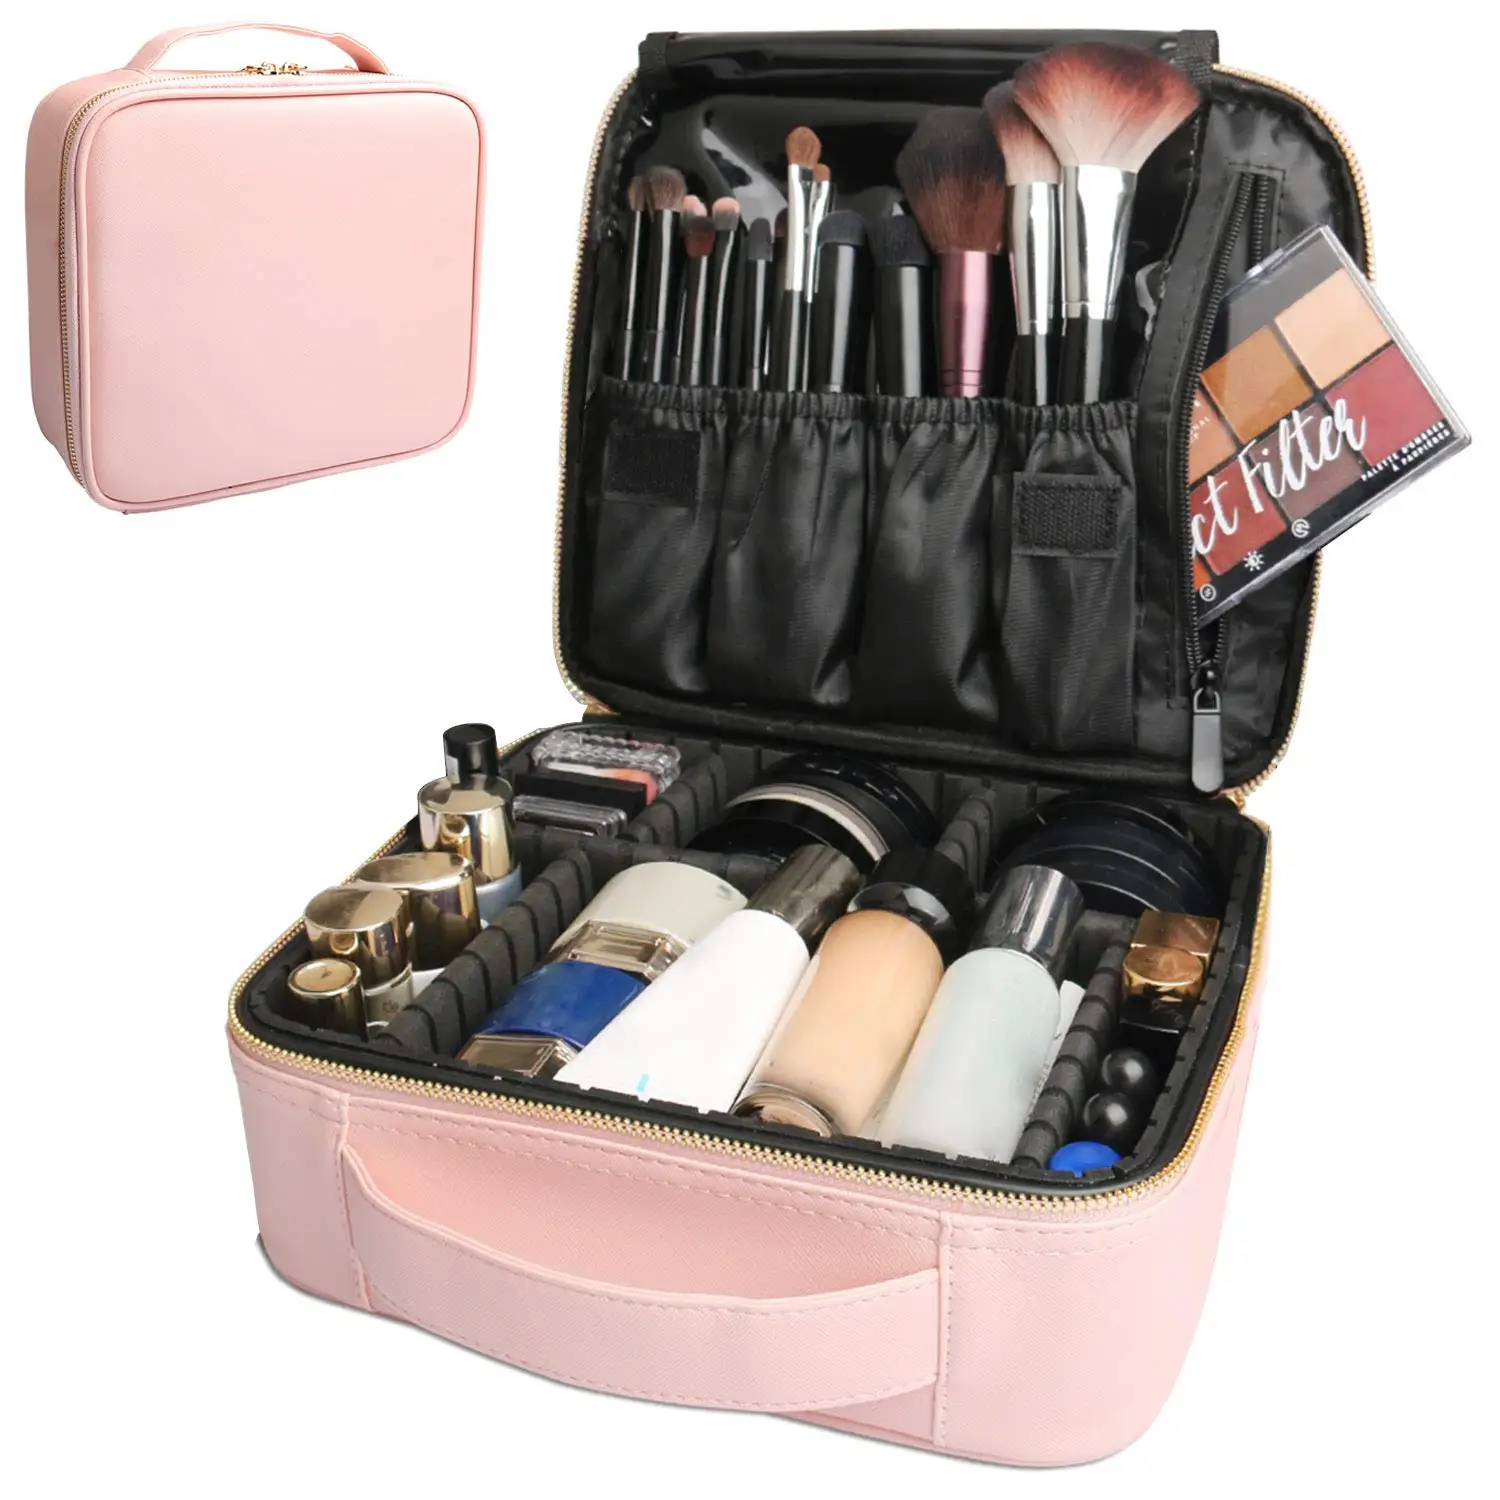 LUXOURIA Makeup Bag for Women Large Cosmetic Bag Leather Train Case  Professional Makeup Case Cute Travel Makeup Organizer with Brush Section &  Removable Dividers 